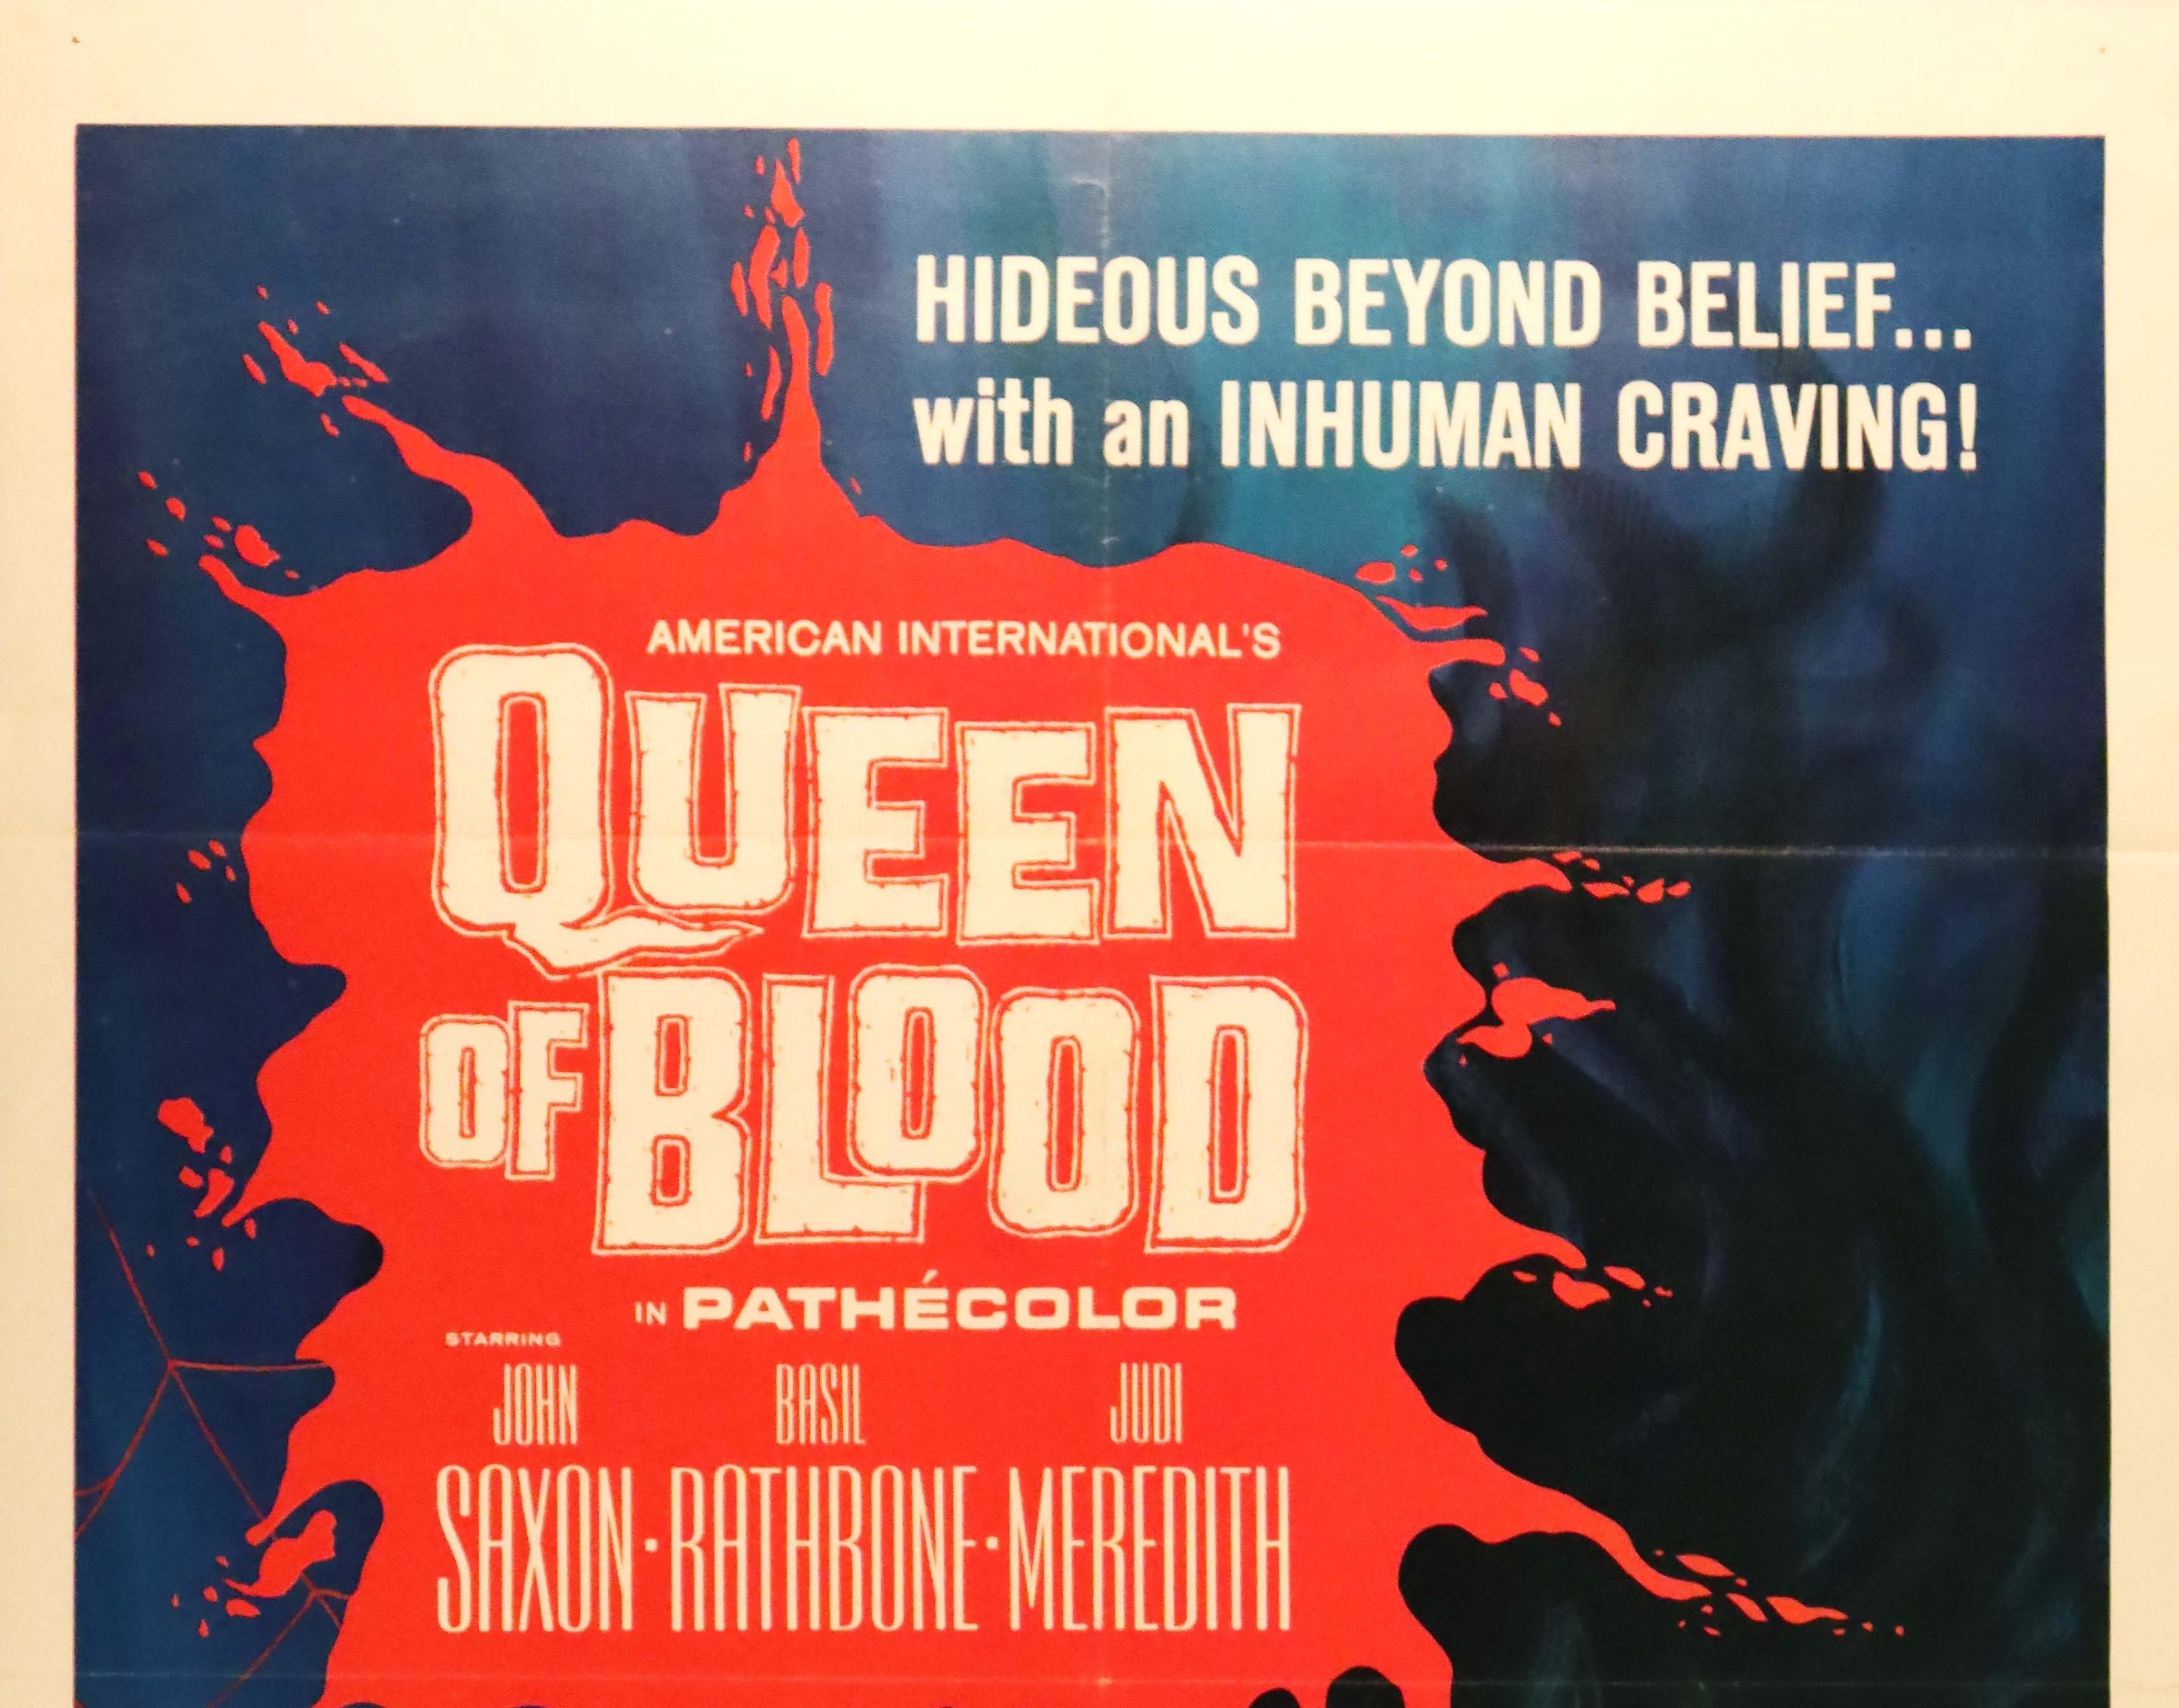 Original vintage movie poster for an American science fiction horror film Queen Of Blood directed by Curtis Harrington and starring John Saxon, Basil Rathbone and Judi Meredith - Hideous beyond belief ... with an inhuman craving! - featuring an